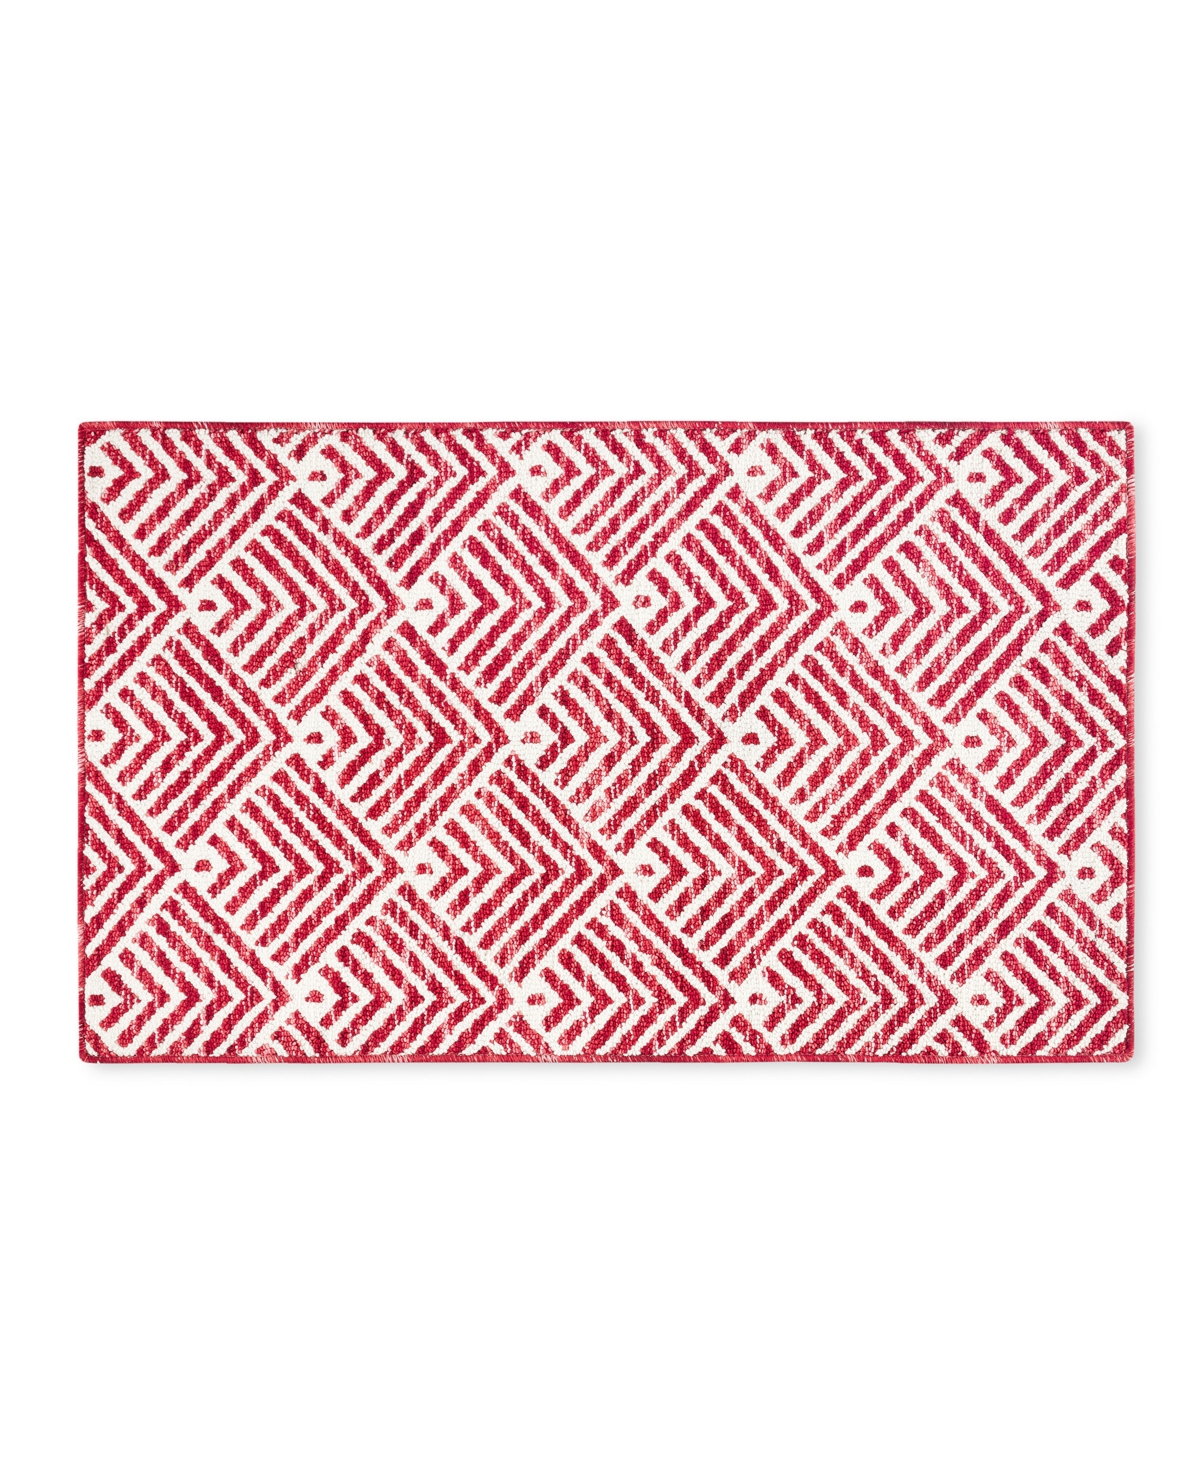 Town & Country Living Everyday Walker Everwash Kitchen Mat E003 2' X 3'4" Area Rug In Red